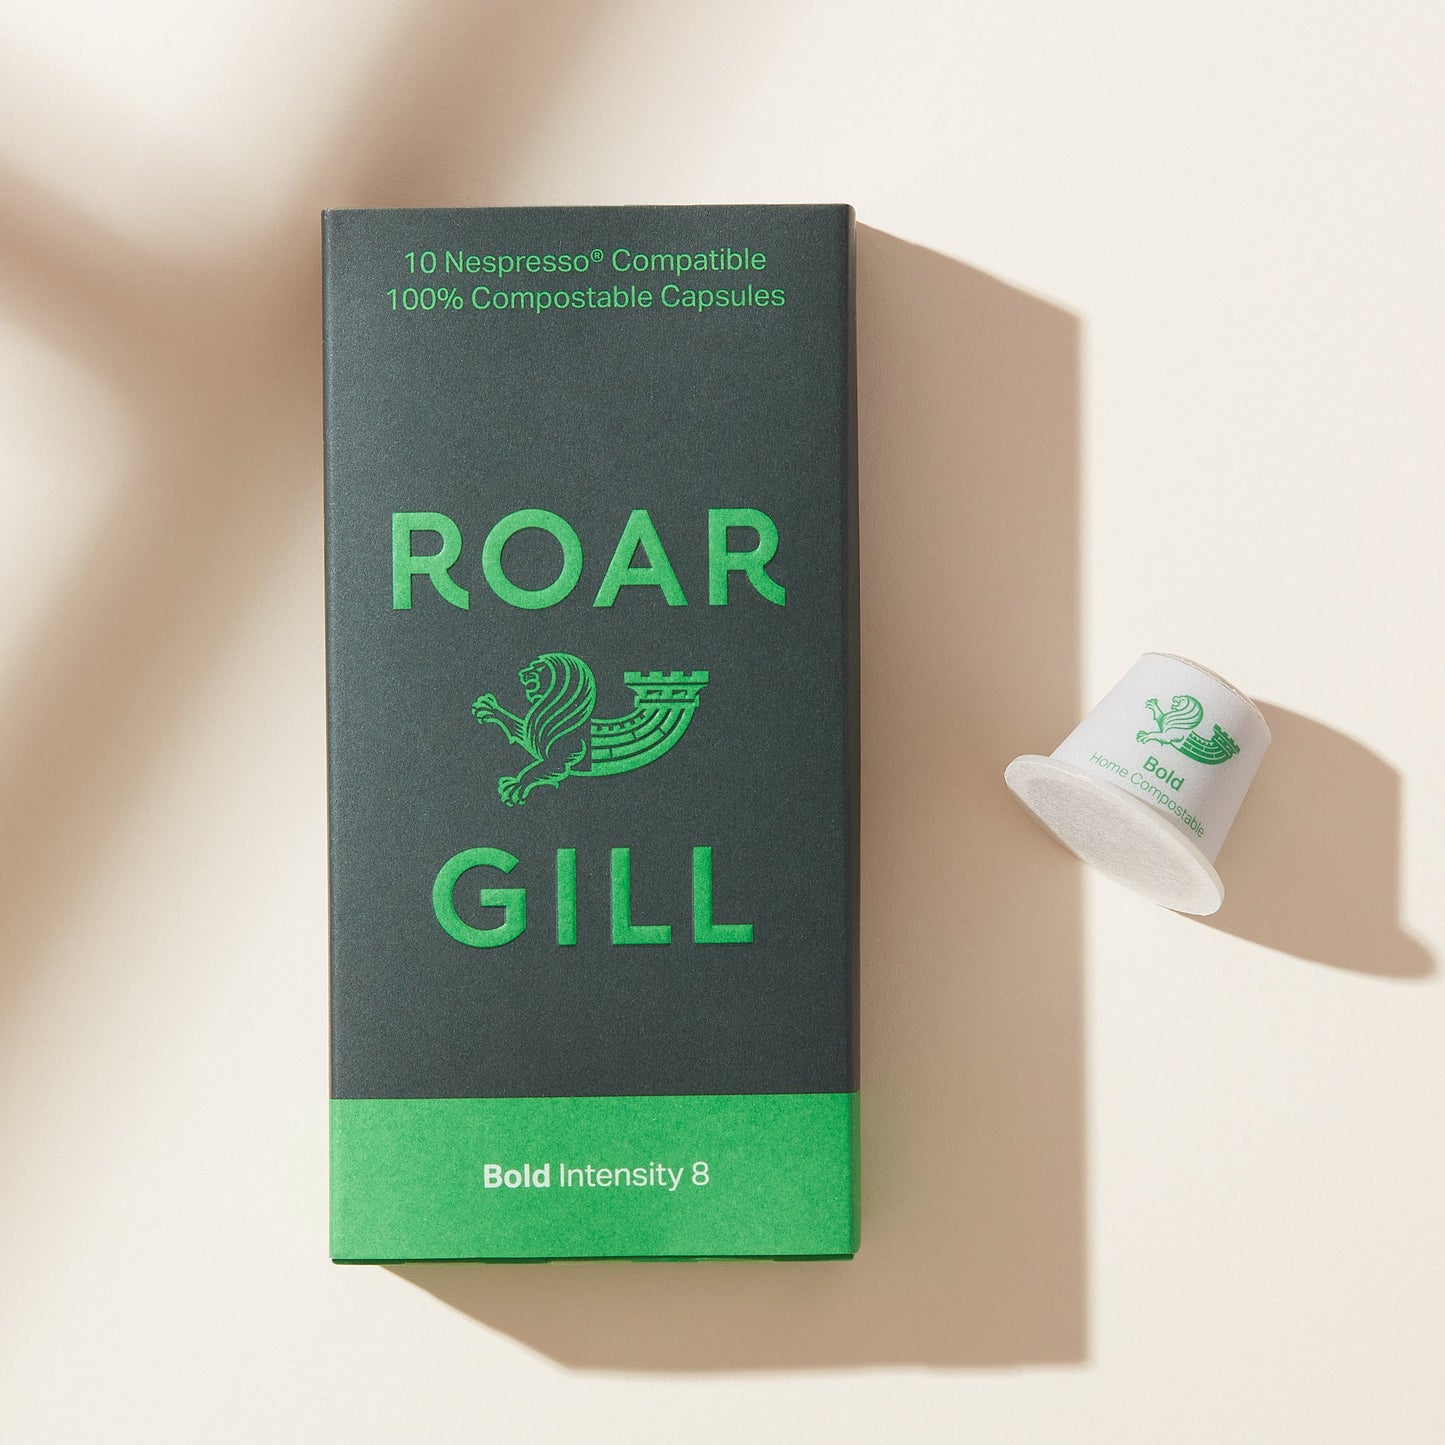 Roar Gill Bold Intensity 8 Coffee Pod. Box of 10 available on subscription.